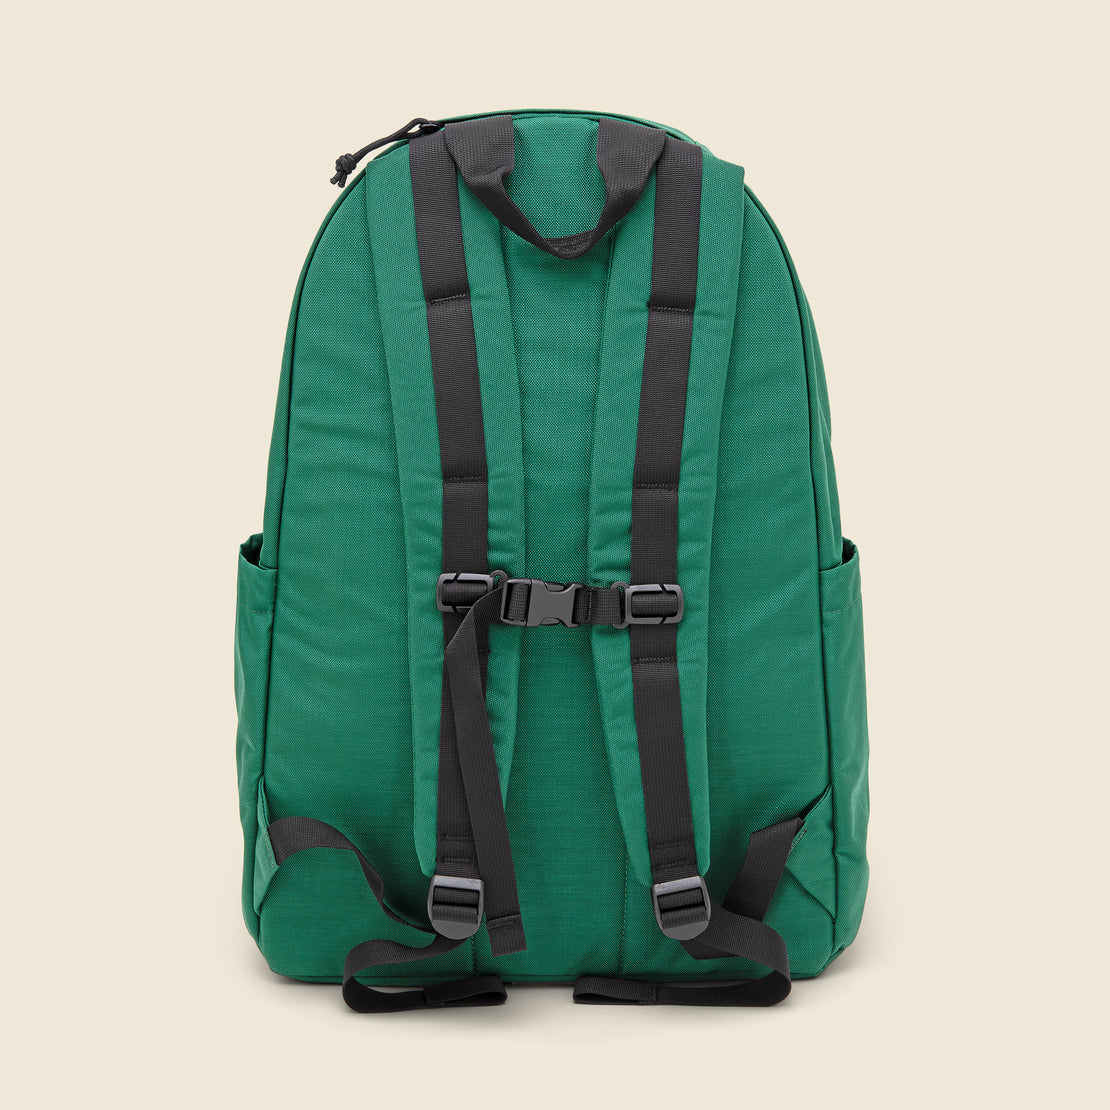 Day Pack - Green - BEAMS+ - STAG Provisions - Accessories - Bags / Luggage